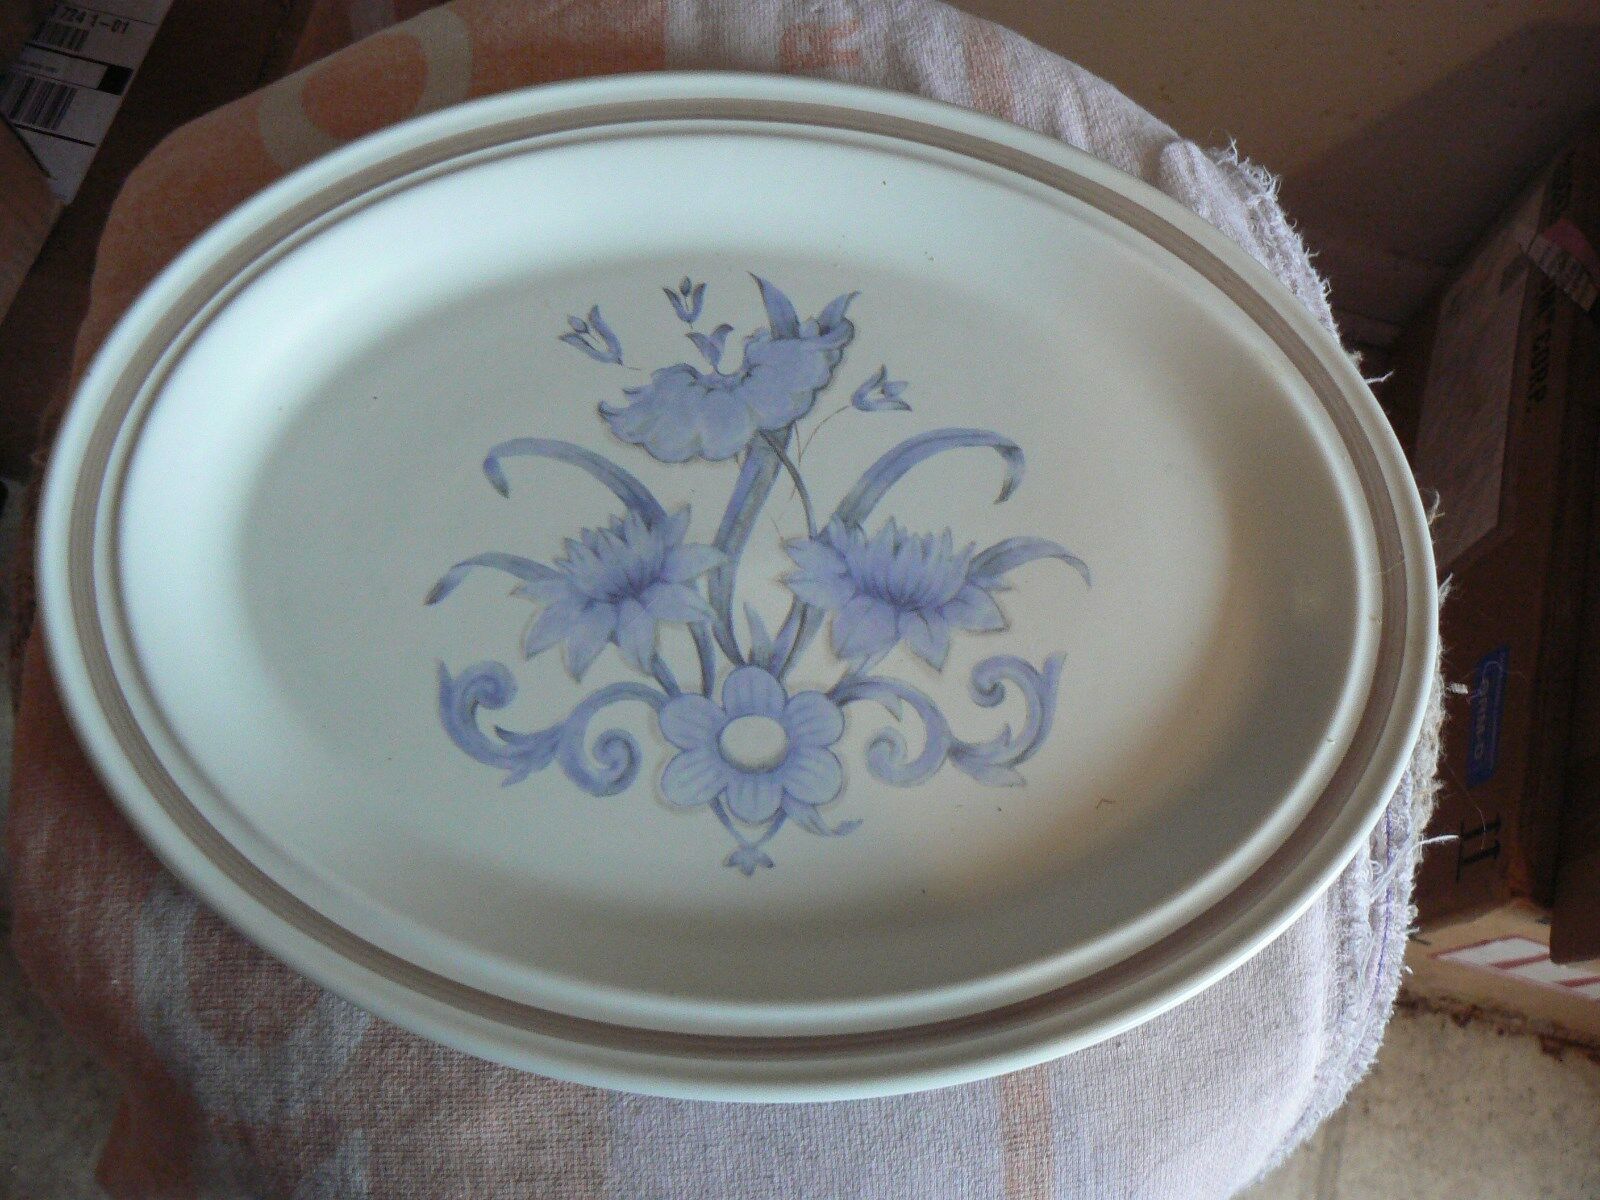 Royal Doulton Inspritation 13 1/2 oval platter 2 available - $15.79